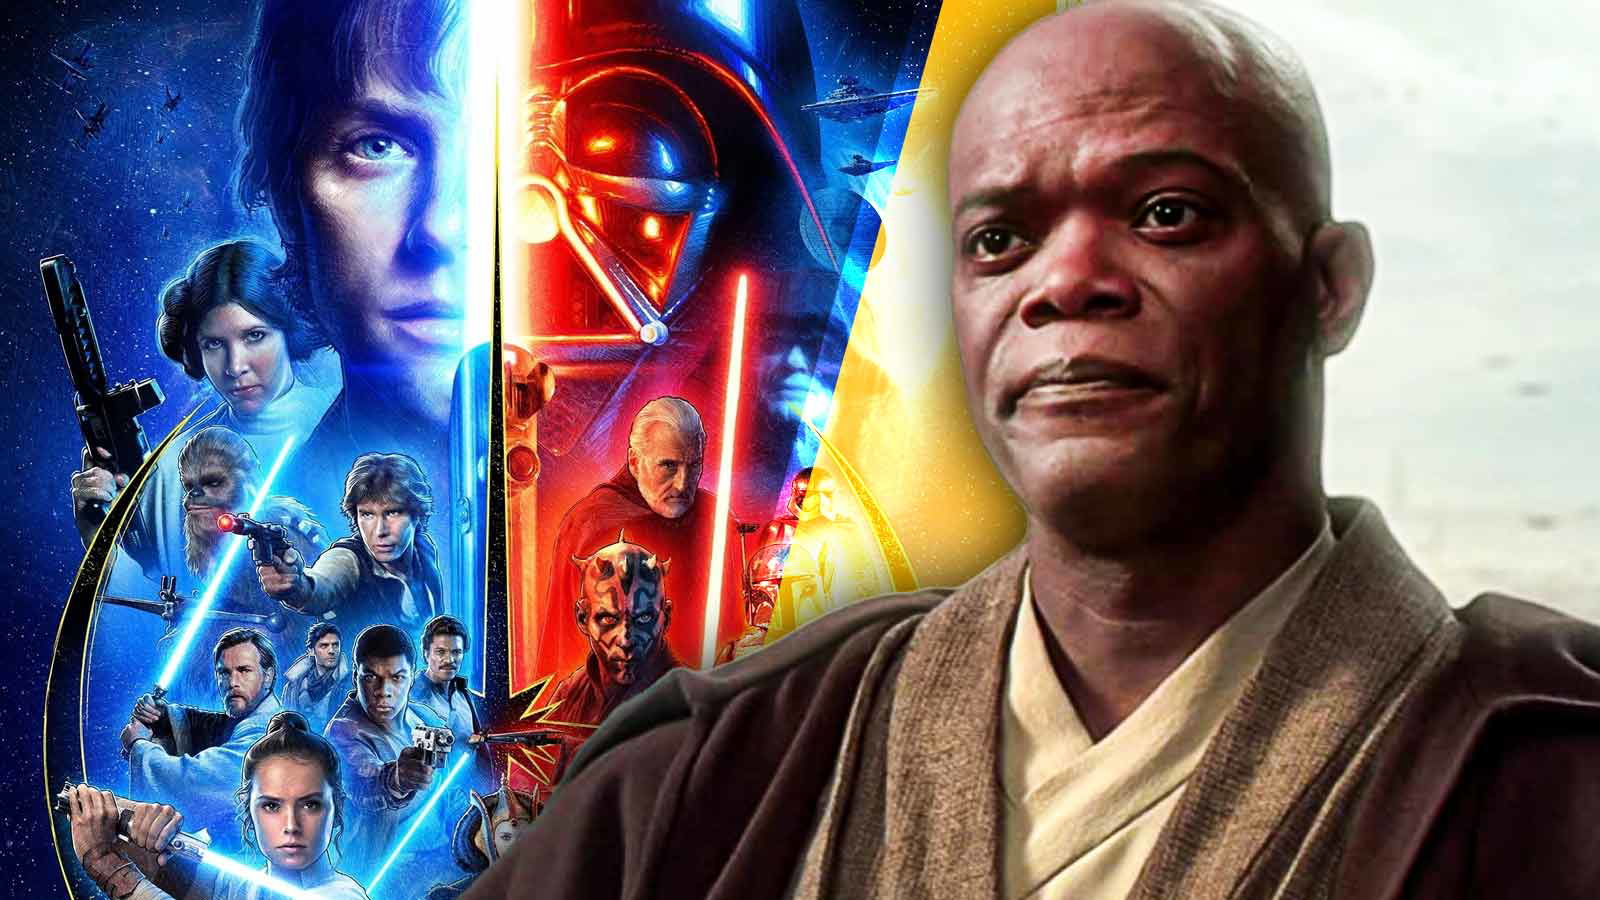 Samuel L. Jackson Never Gave a Damn When a Star Wars Legend Stole His Crown as World’s Highest Grossing Actor, He Knew He’d Beat Him Soon